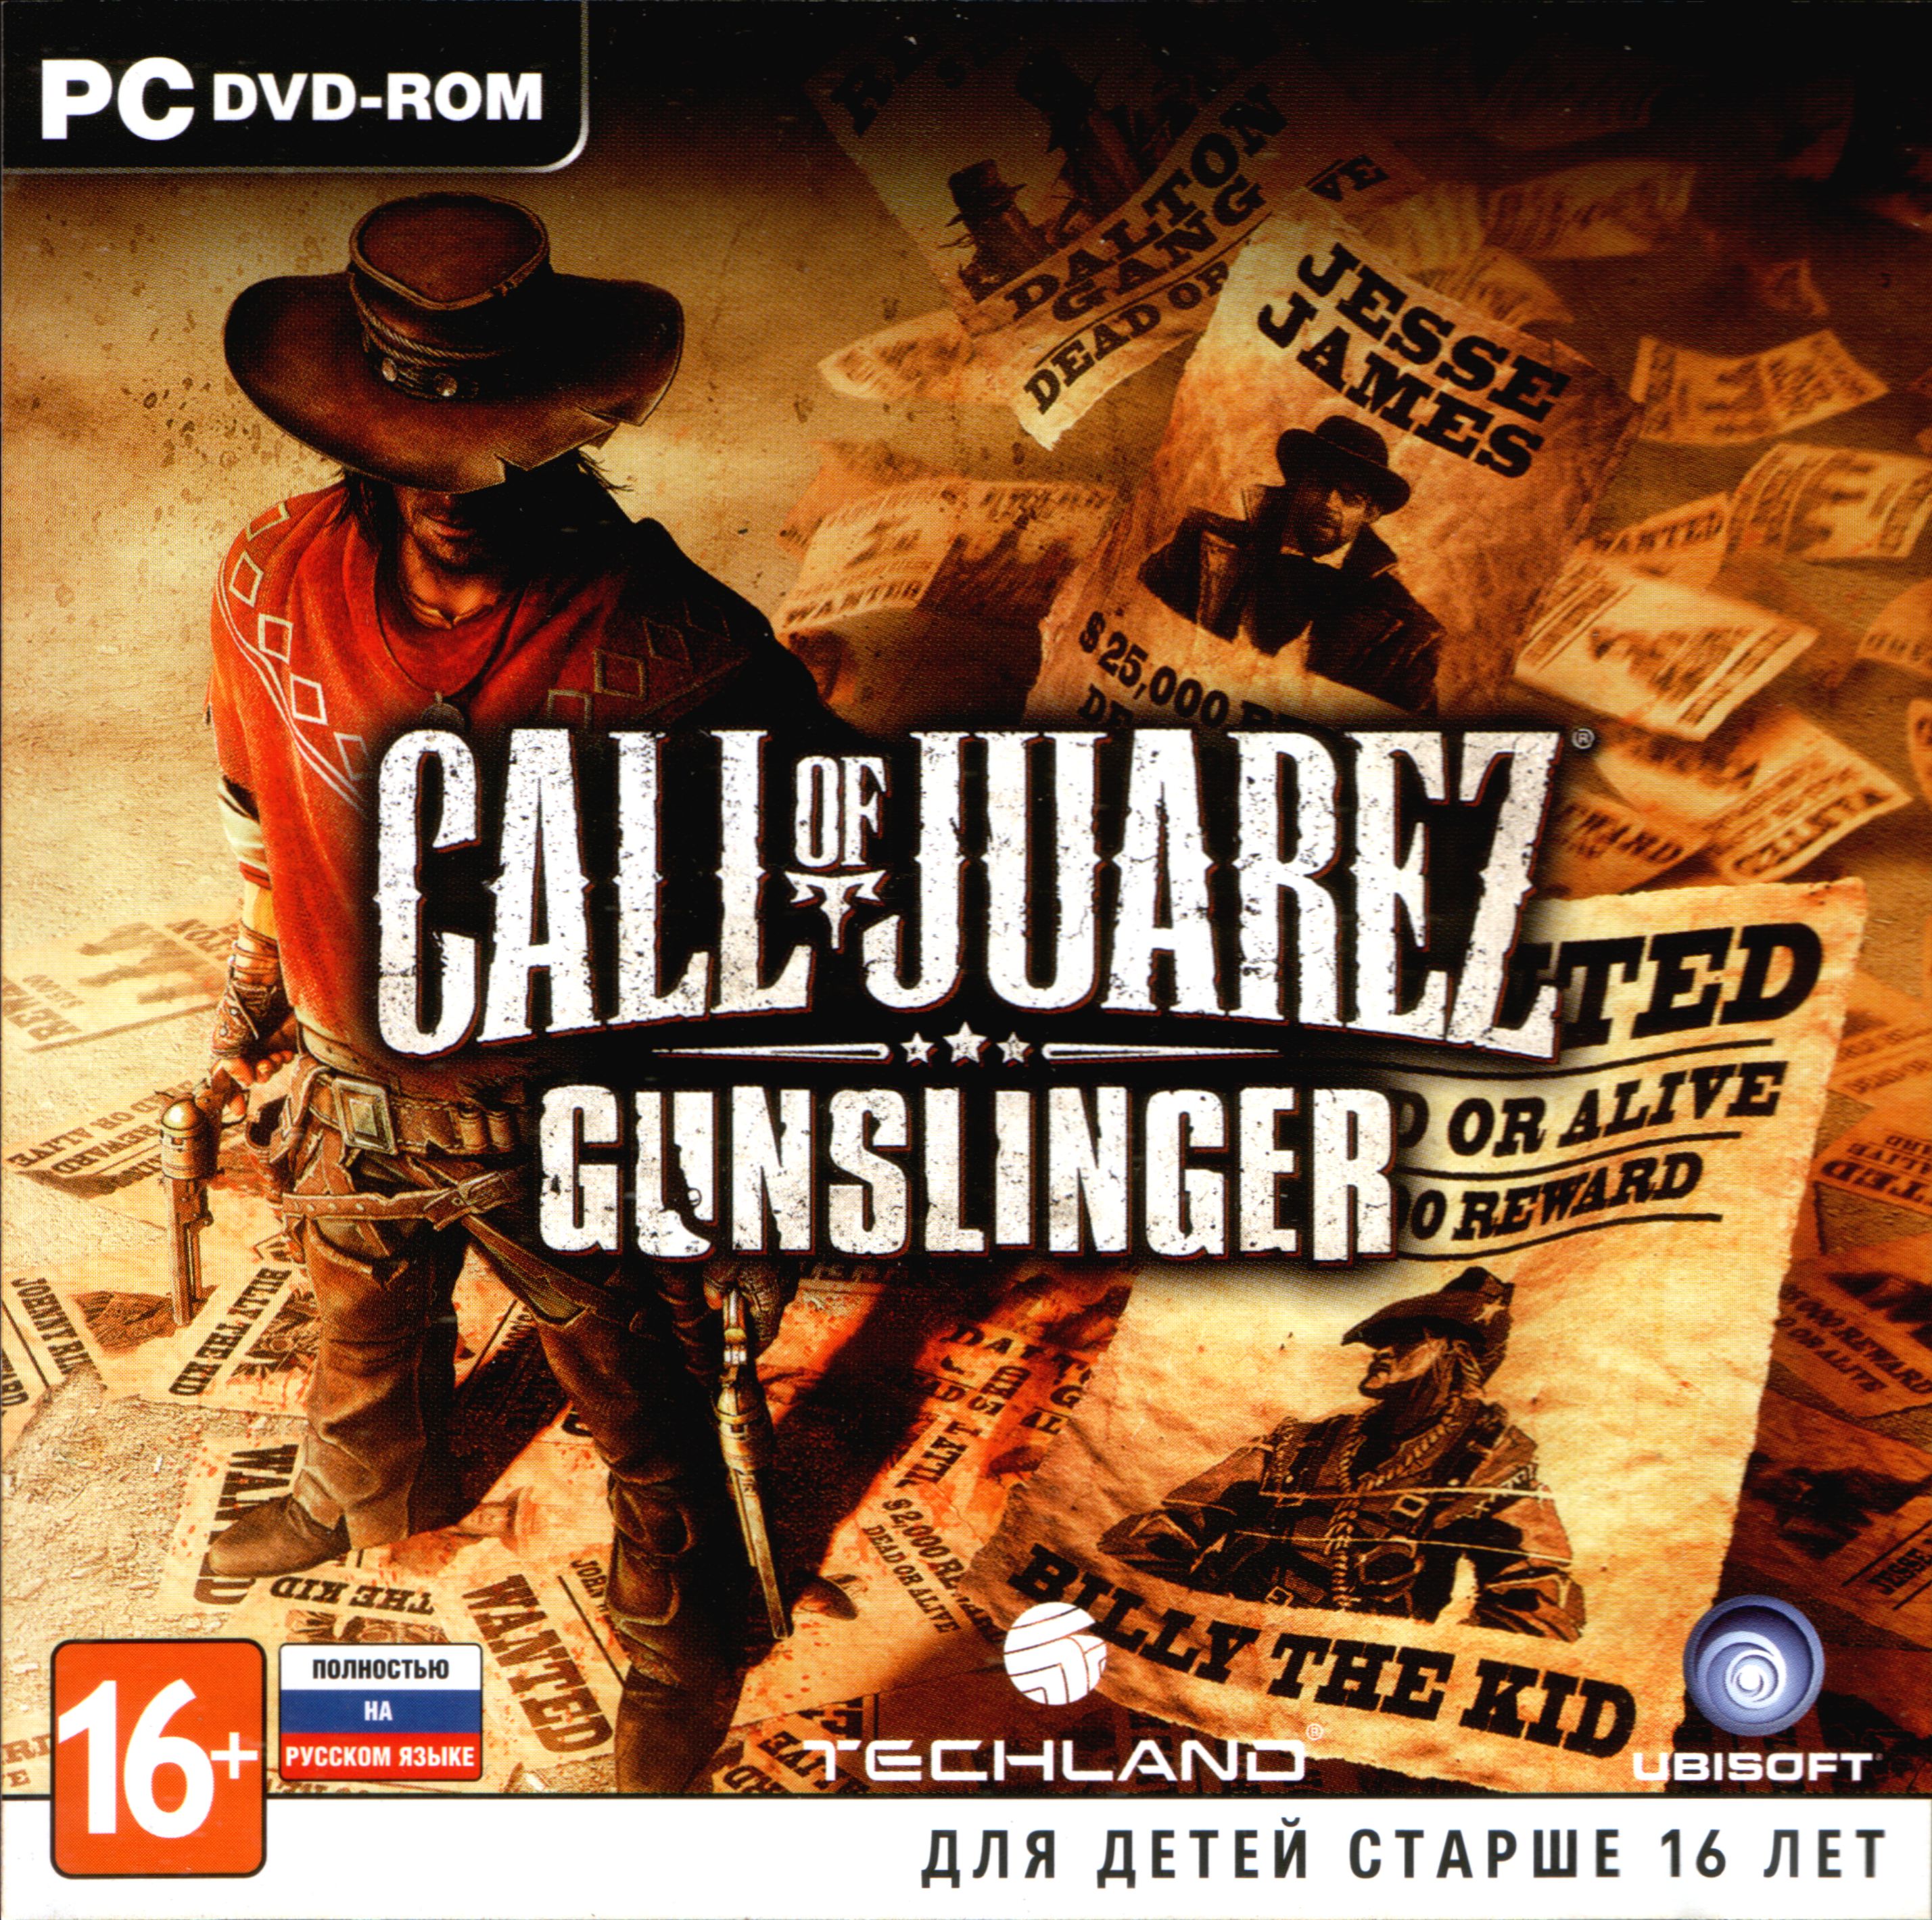 Call of juarez gunslinger steam is required фото 56